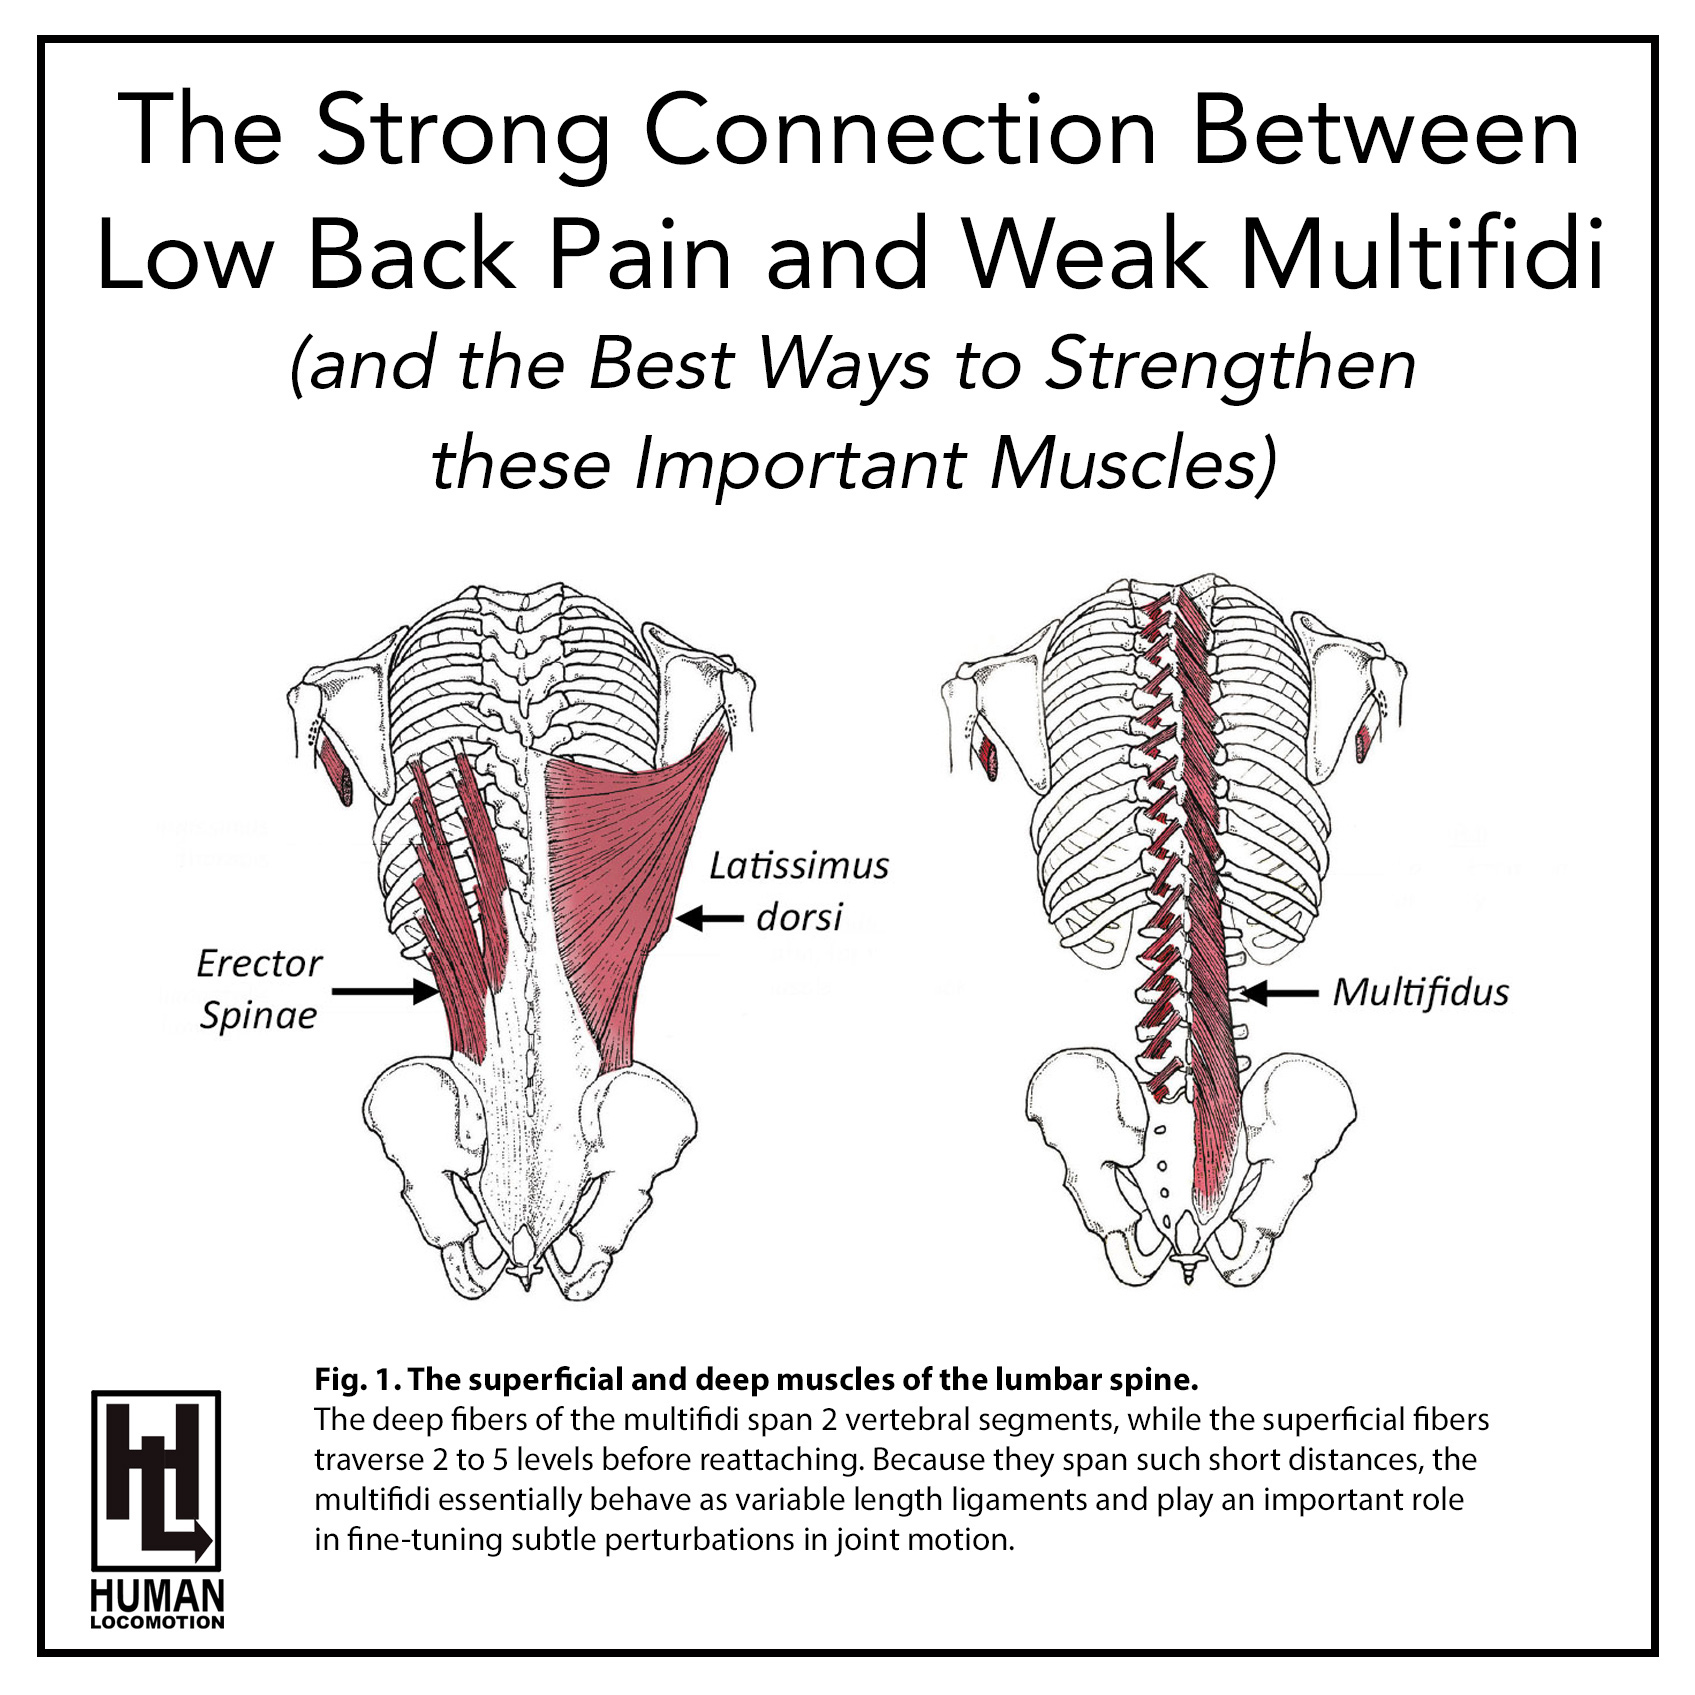 The Strong Connection BetweenLow Back Pain and Weak Multifidi(and the Best Ways to Strengthen these Important Muscles)